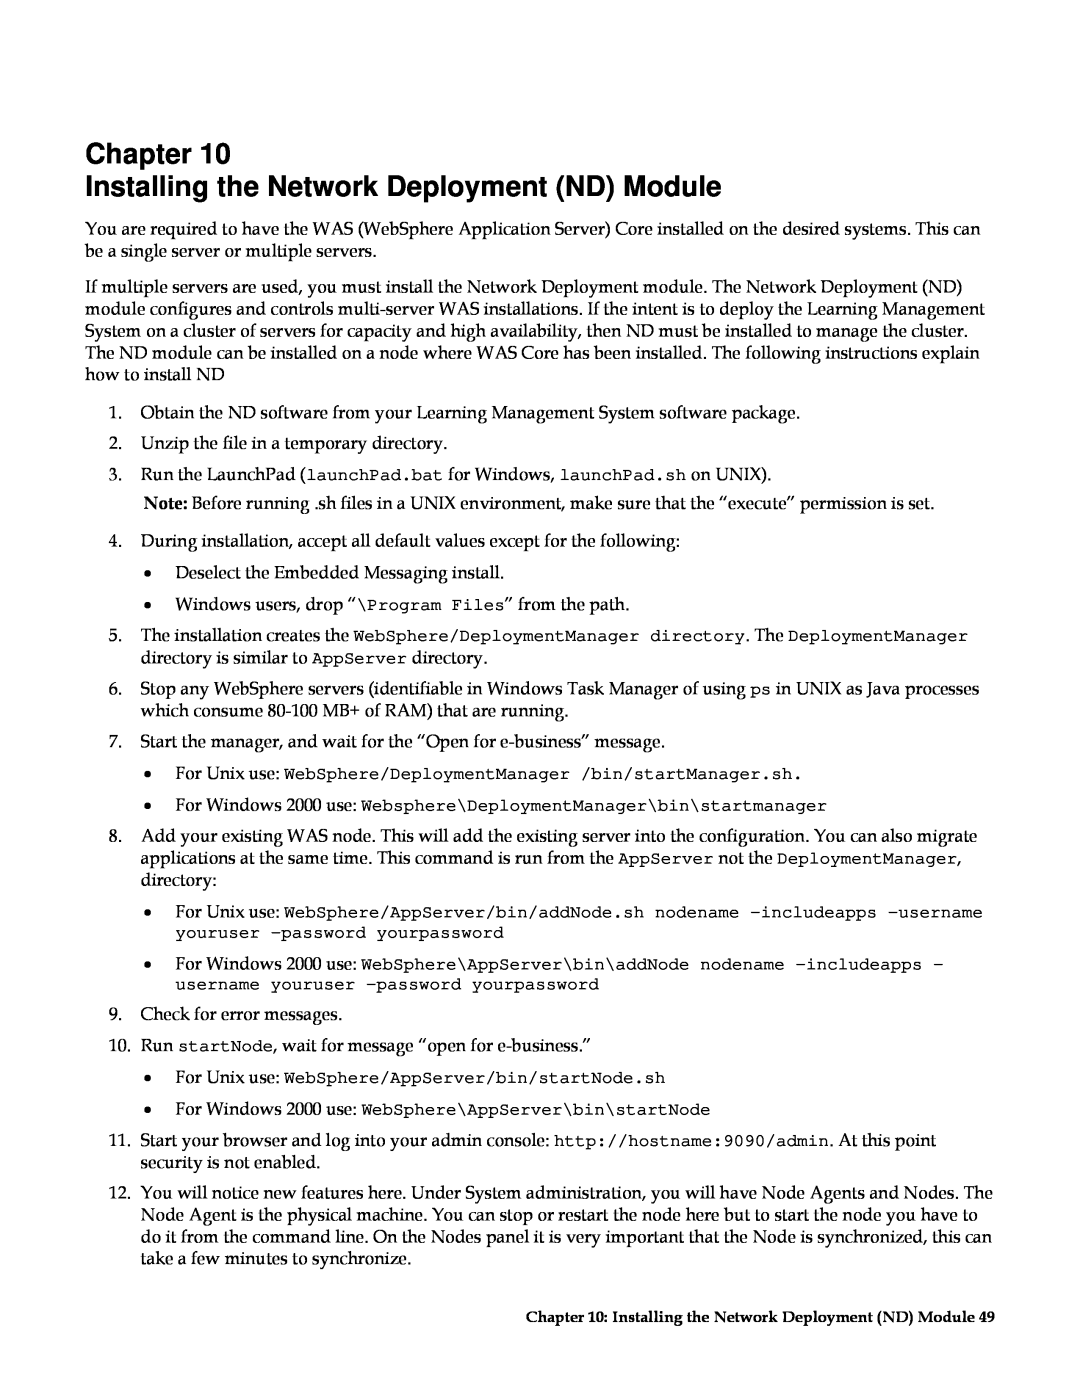 IBM G210-1784-00 manual Chapter Installing the Network Deployment ND Module 